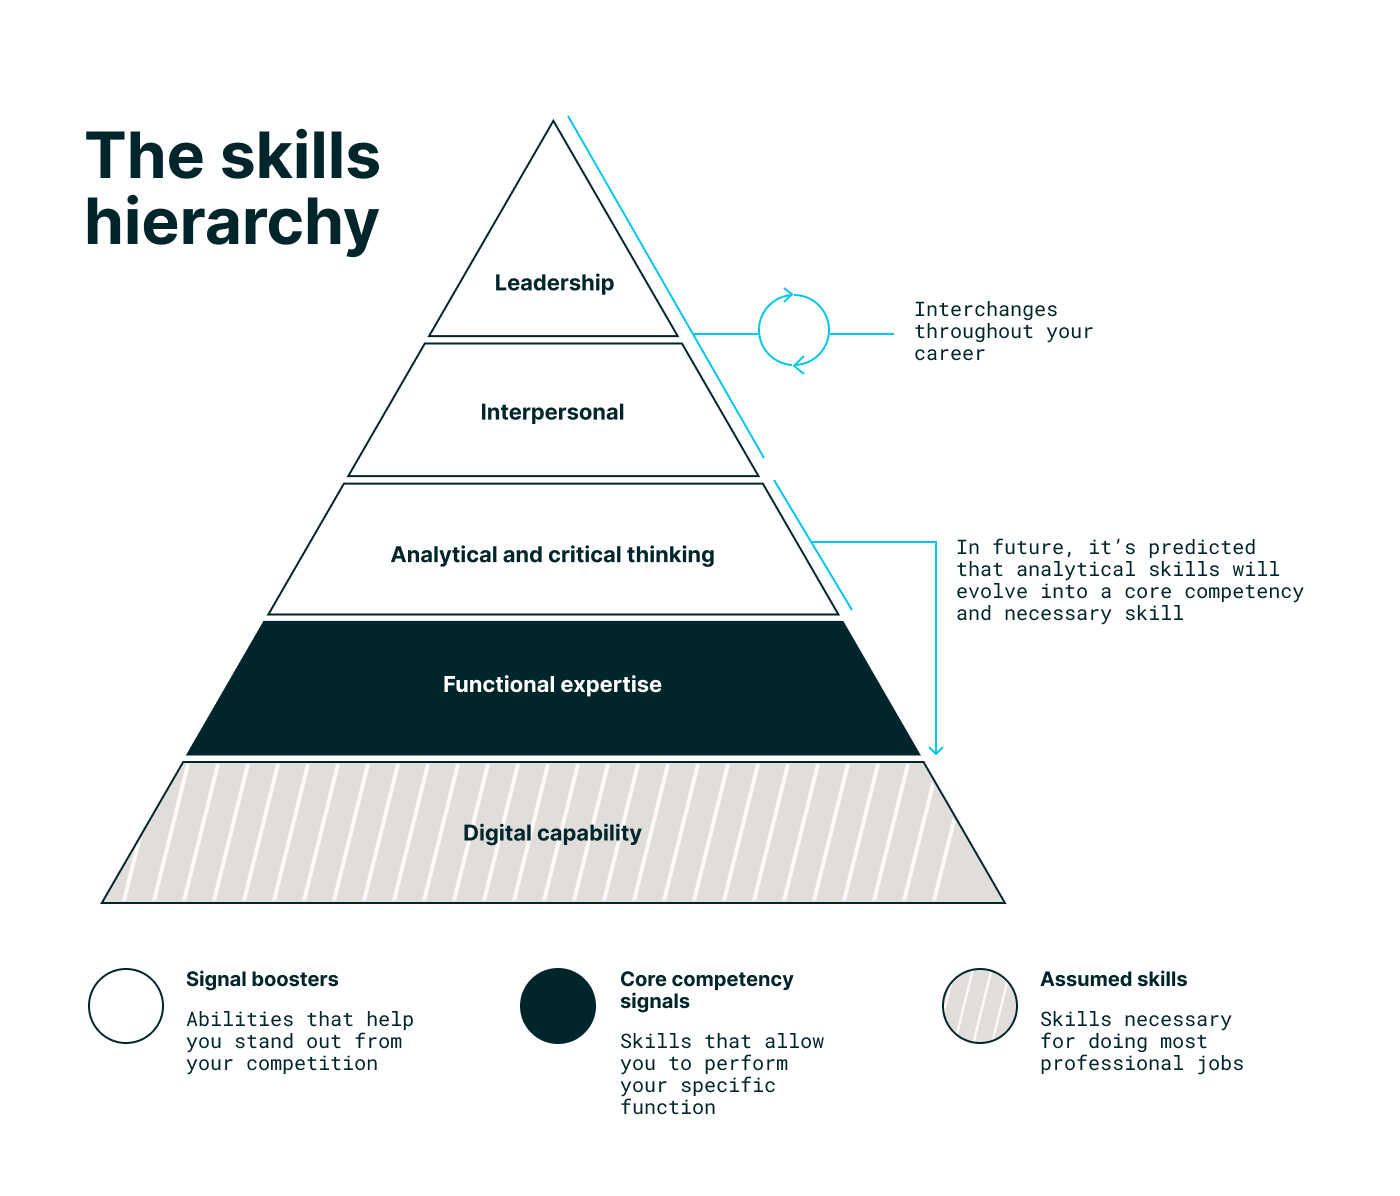 The skills hierarchy